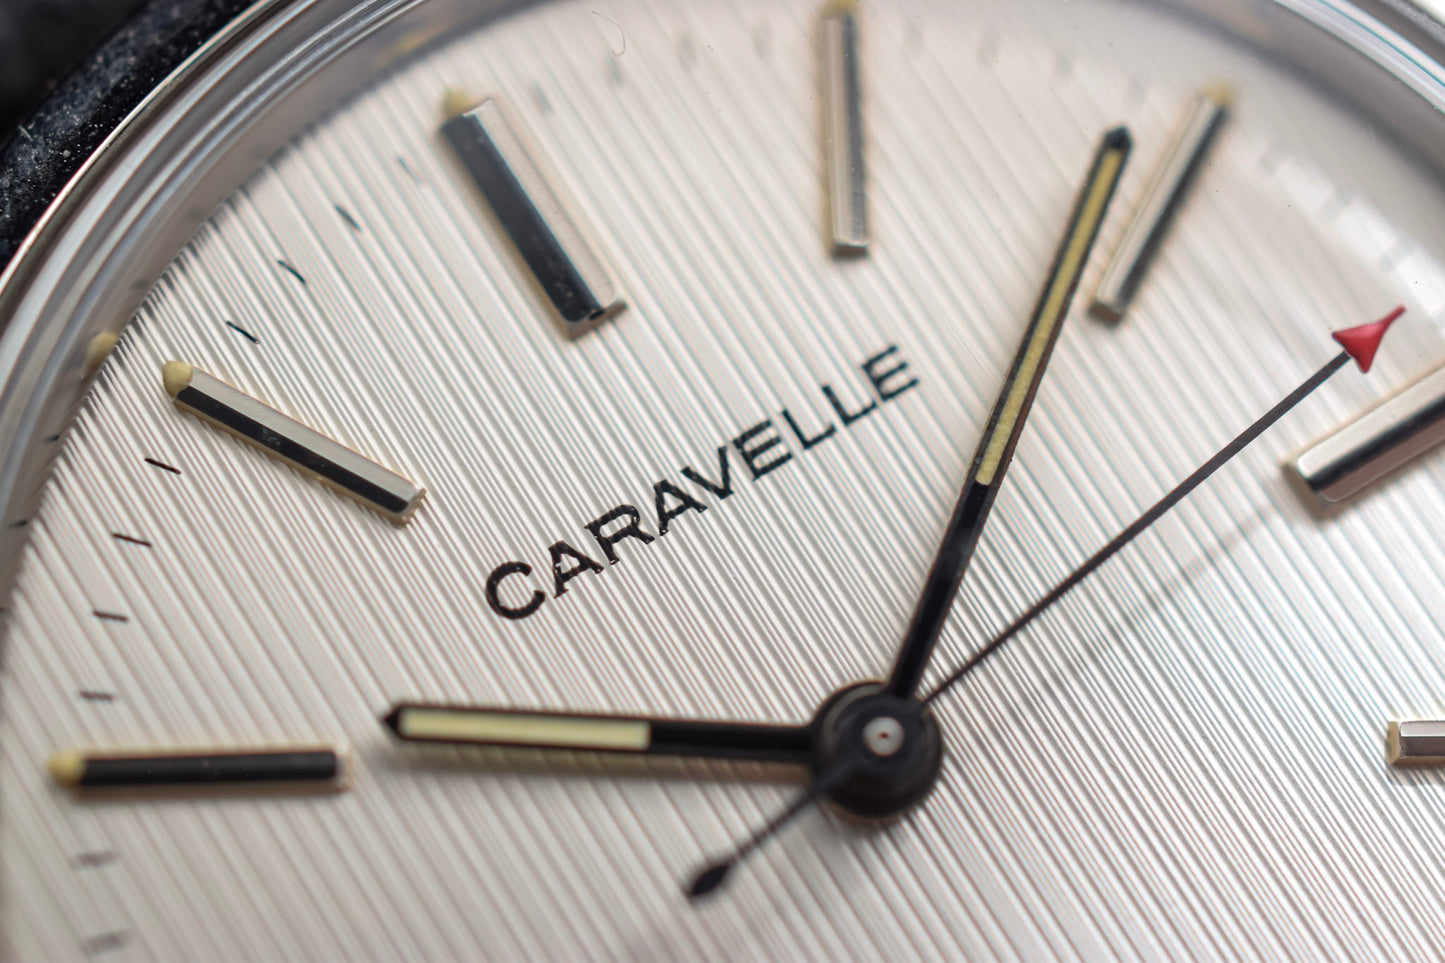 1981 Caravelle Mechanical Tapestry Dial - New Old Stock